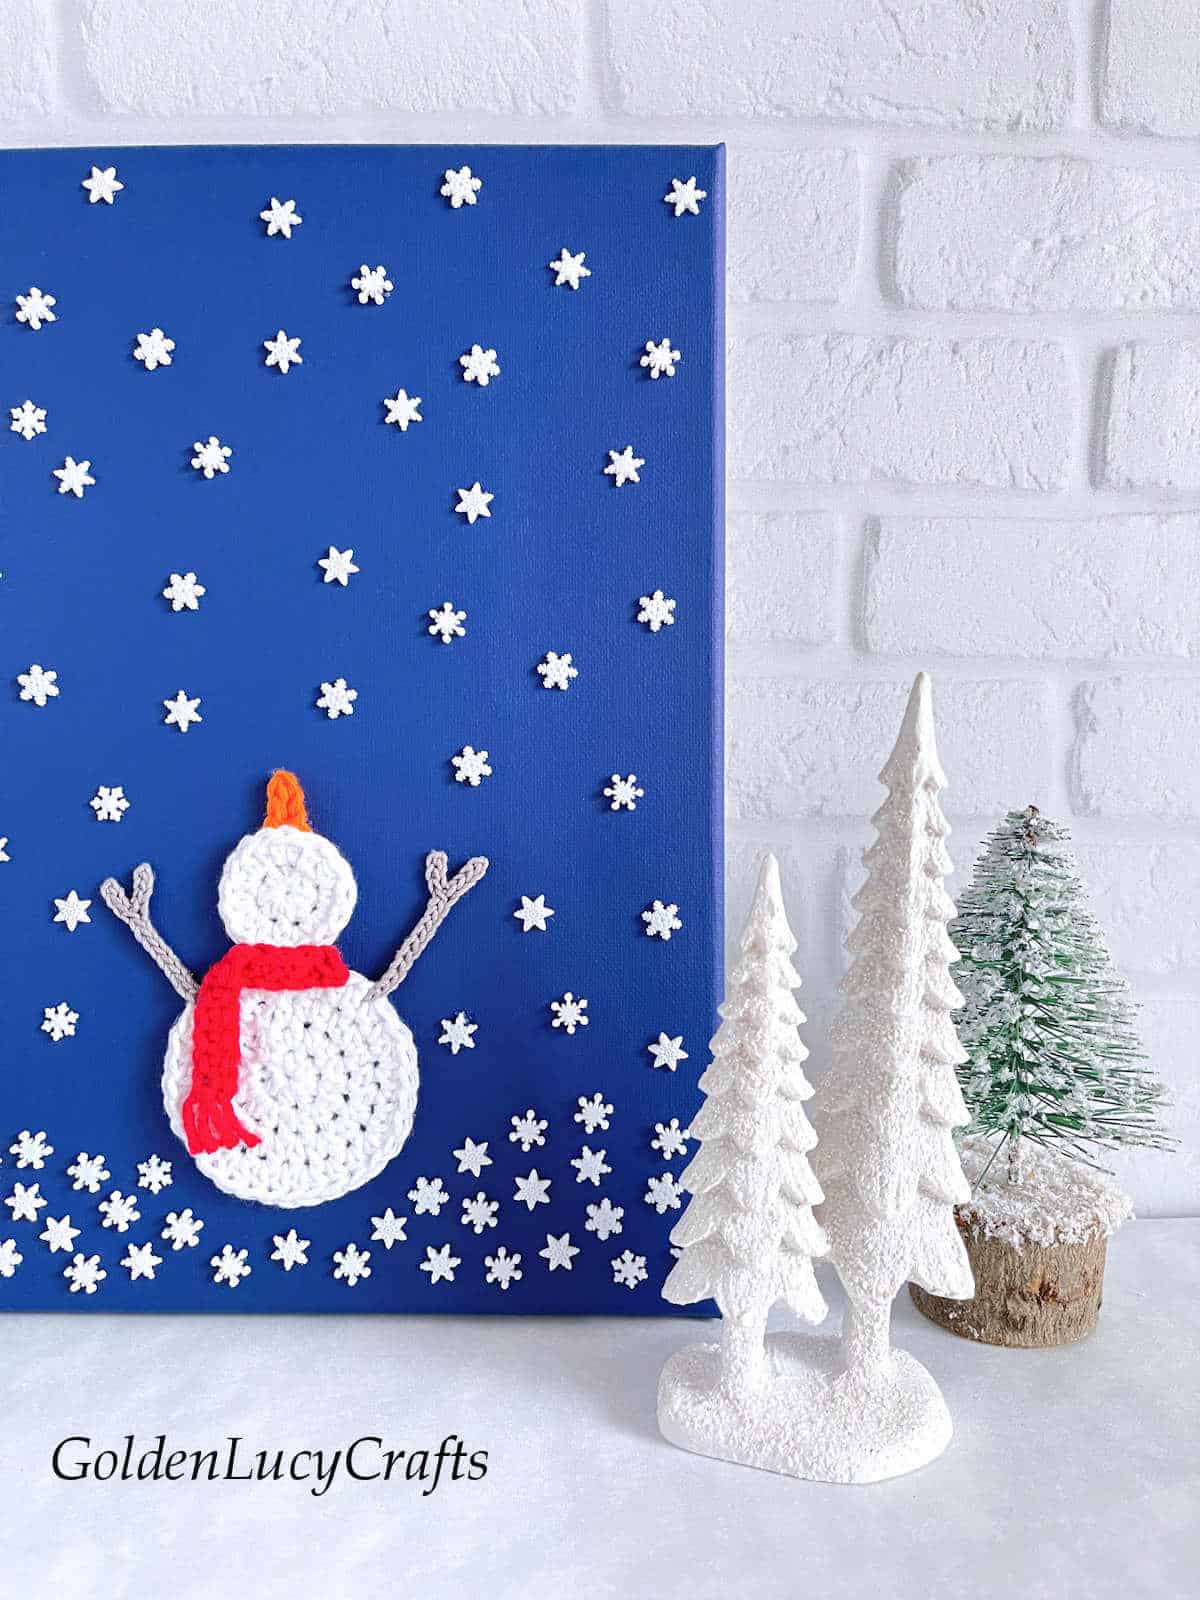 Crochet wall art snowman catching snowflakes close up picture.